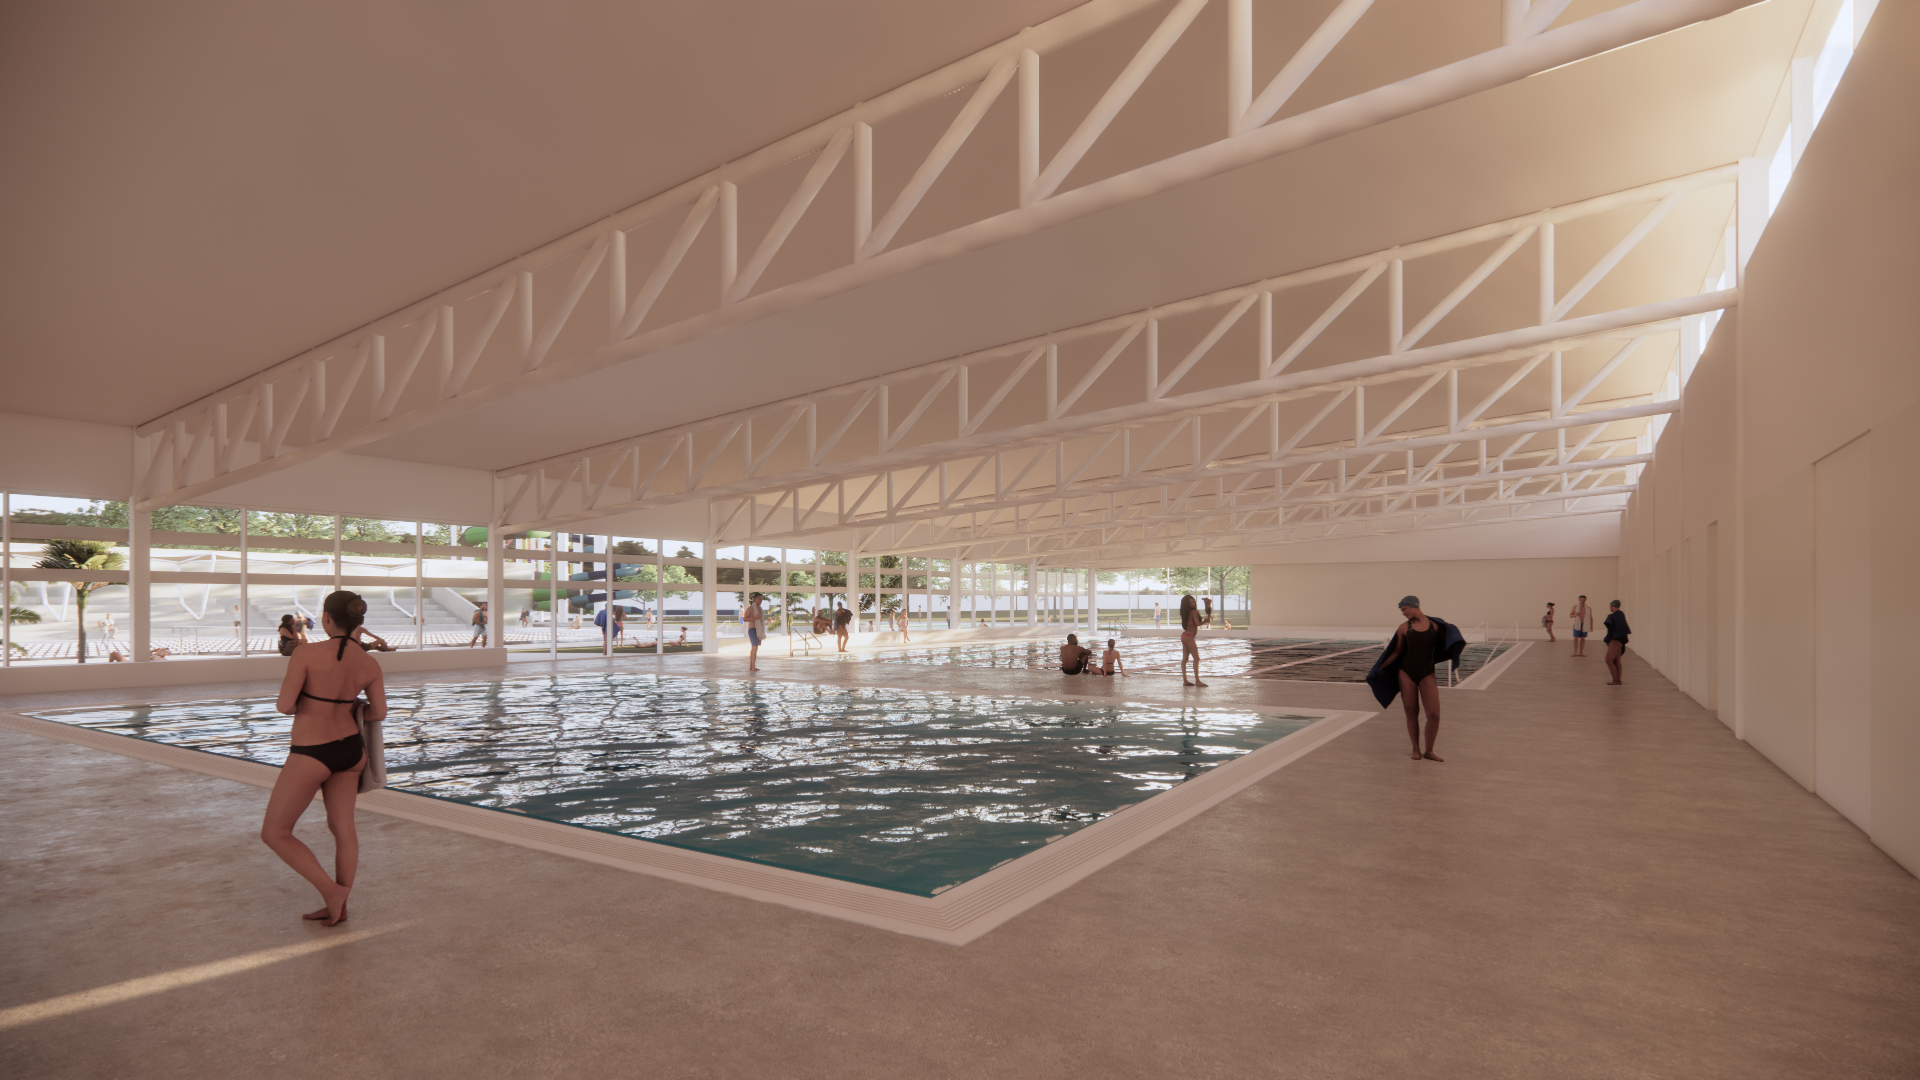 image of generated design plan showing the indoor pool hall